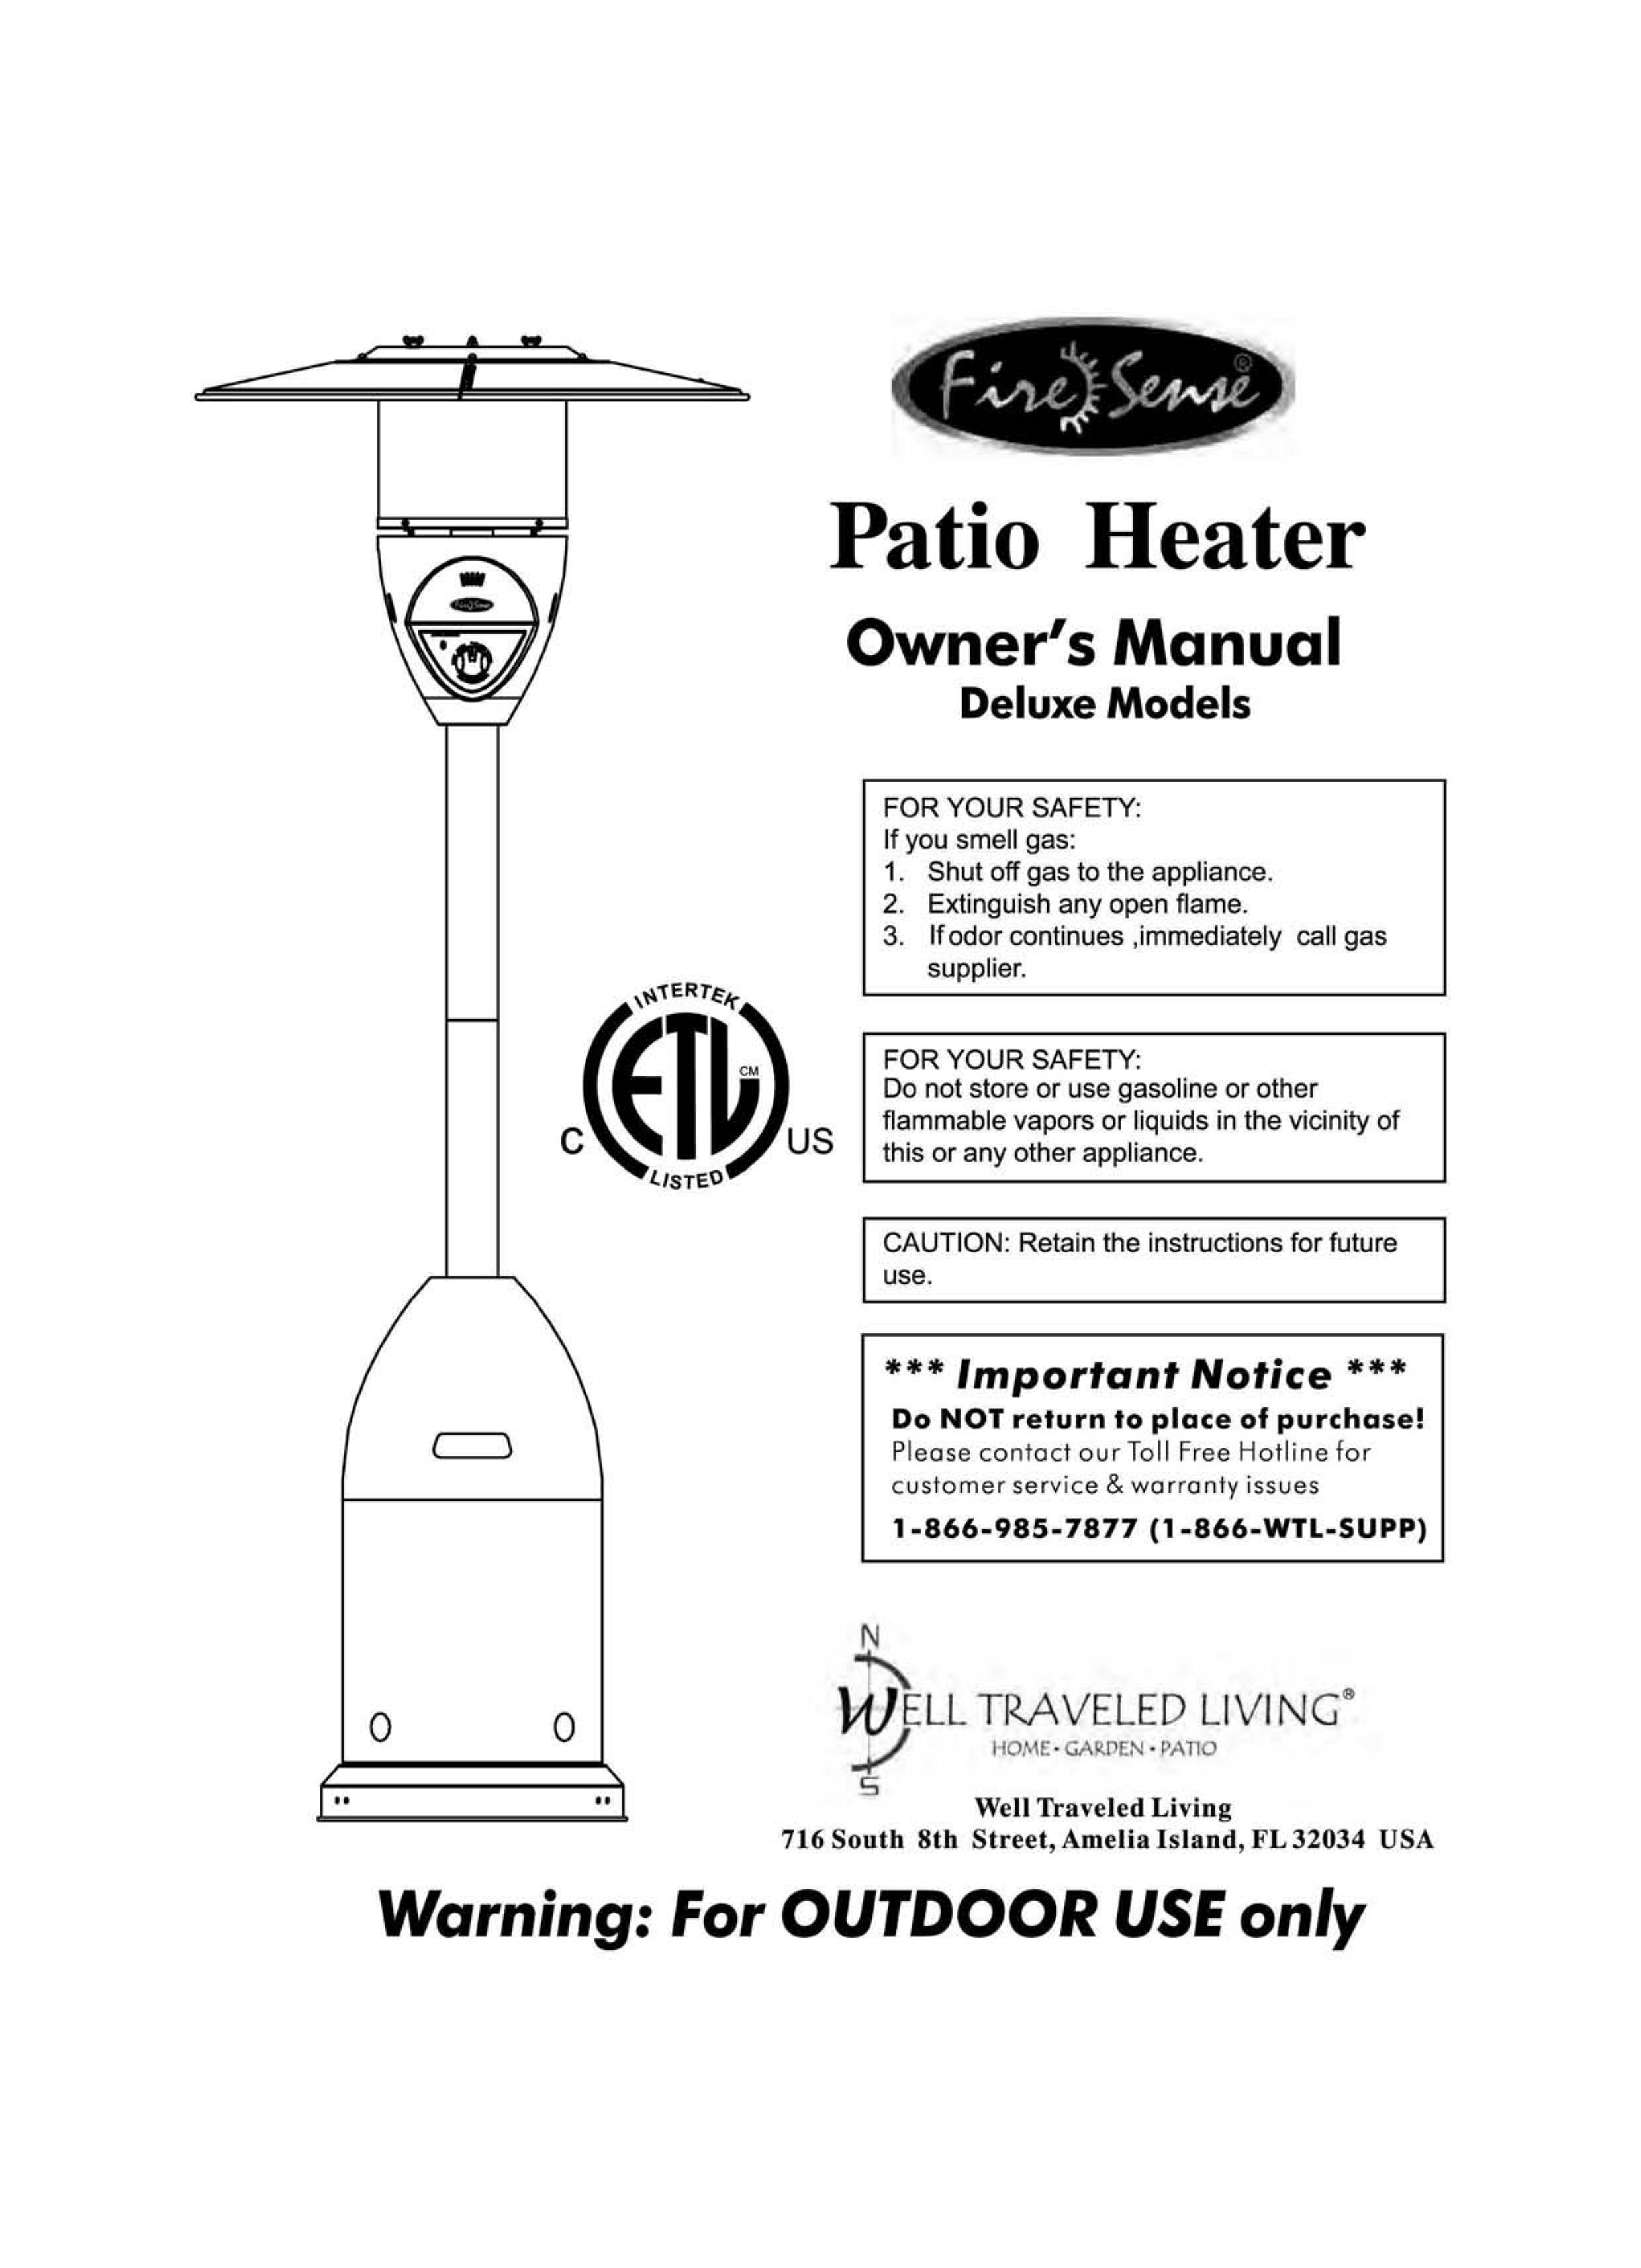 Well Traveled Living 55006 Patio Heater User Manual